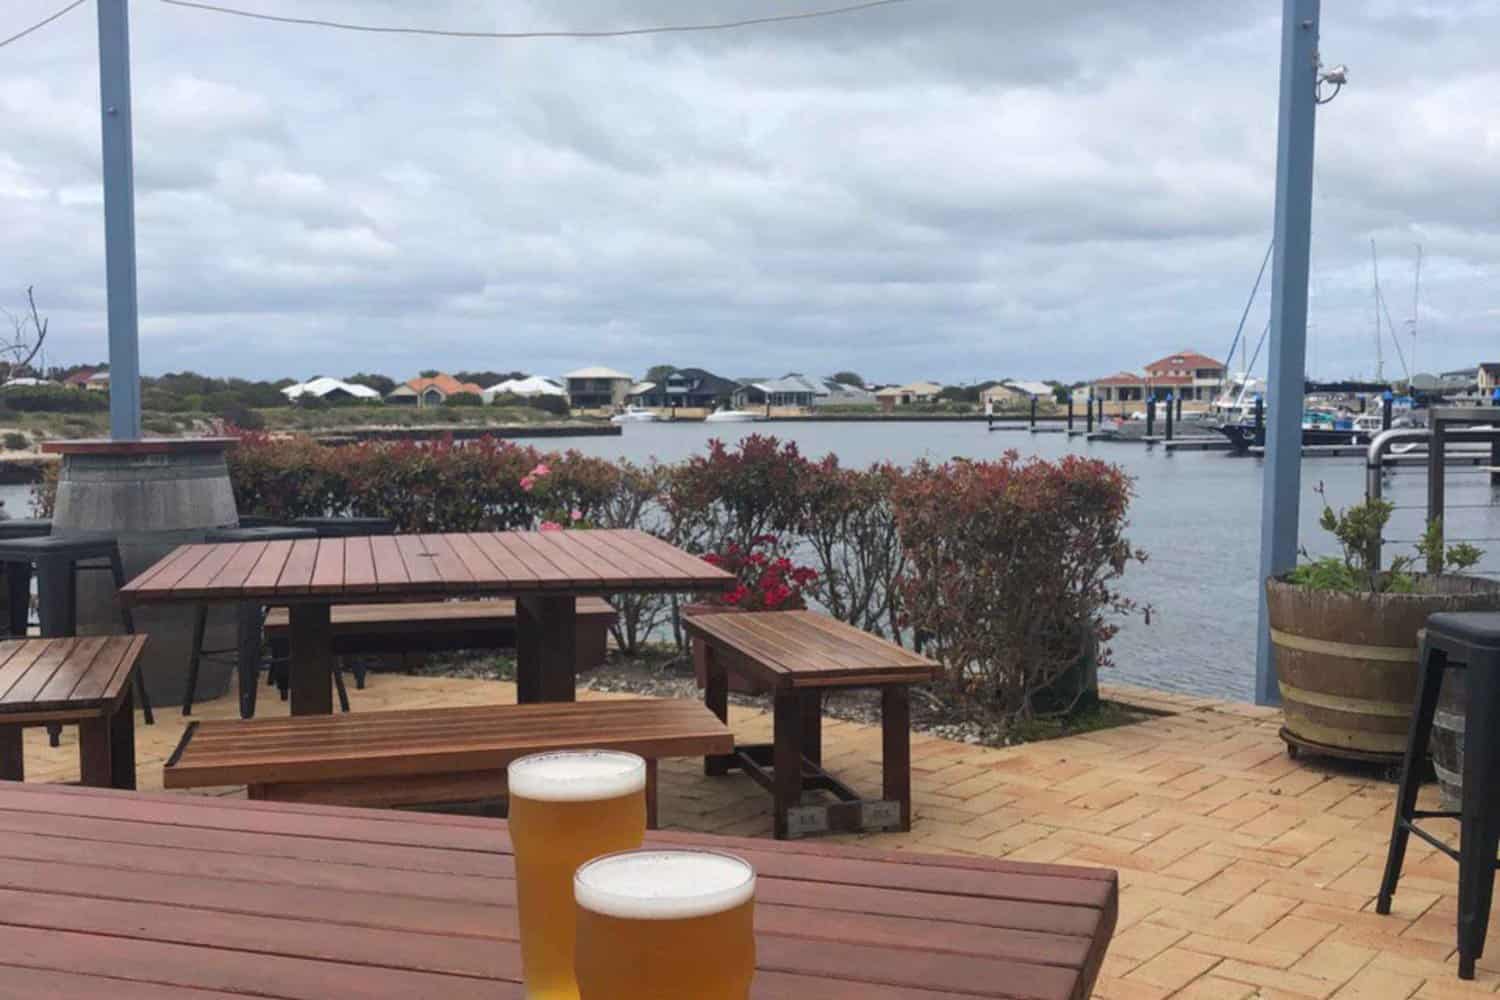 A photo of frosty beers on a wooden table at a brewery overlooking the water. The serene view of the water adds to the relaxing vibe of the brewery, perfect for enjoying a cold pint and the company of friends. The view creates a cozy atmosphere that invites you to stay awhile and take in the beautiful surroundings.